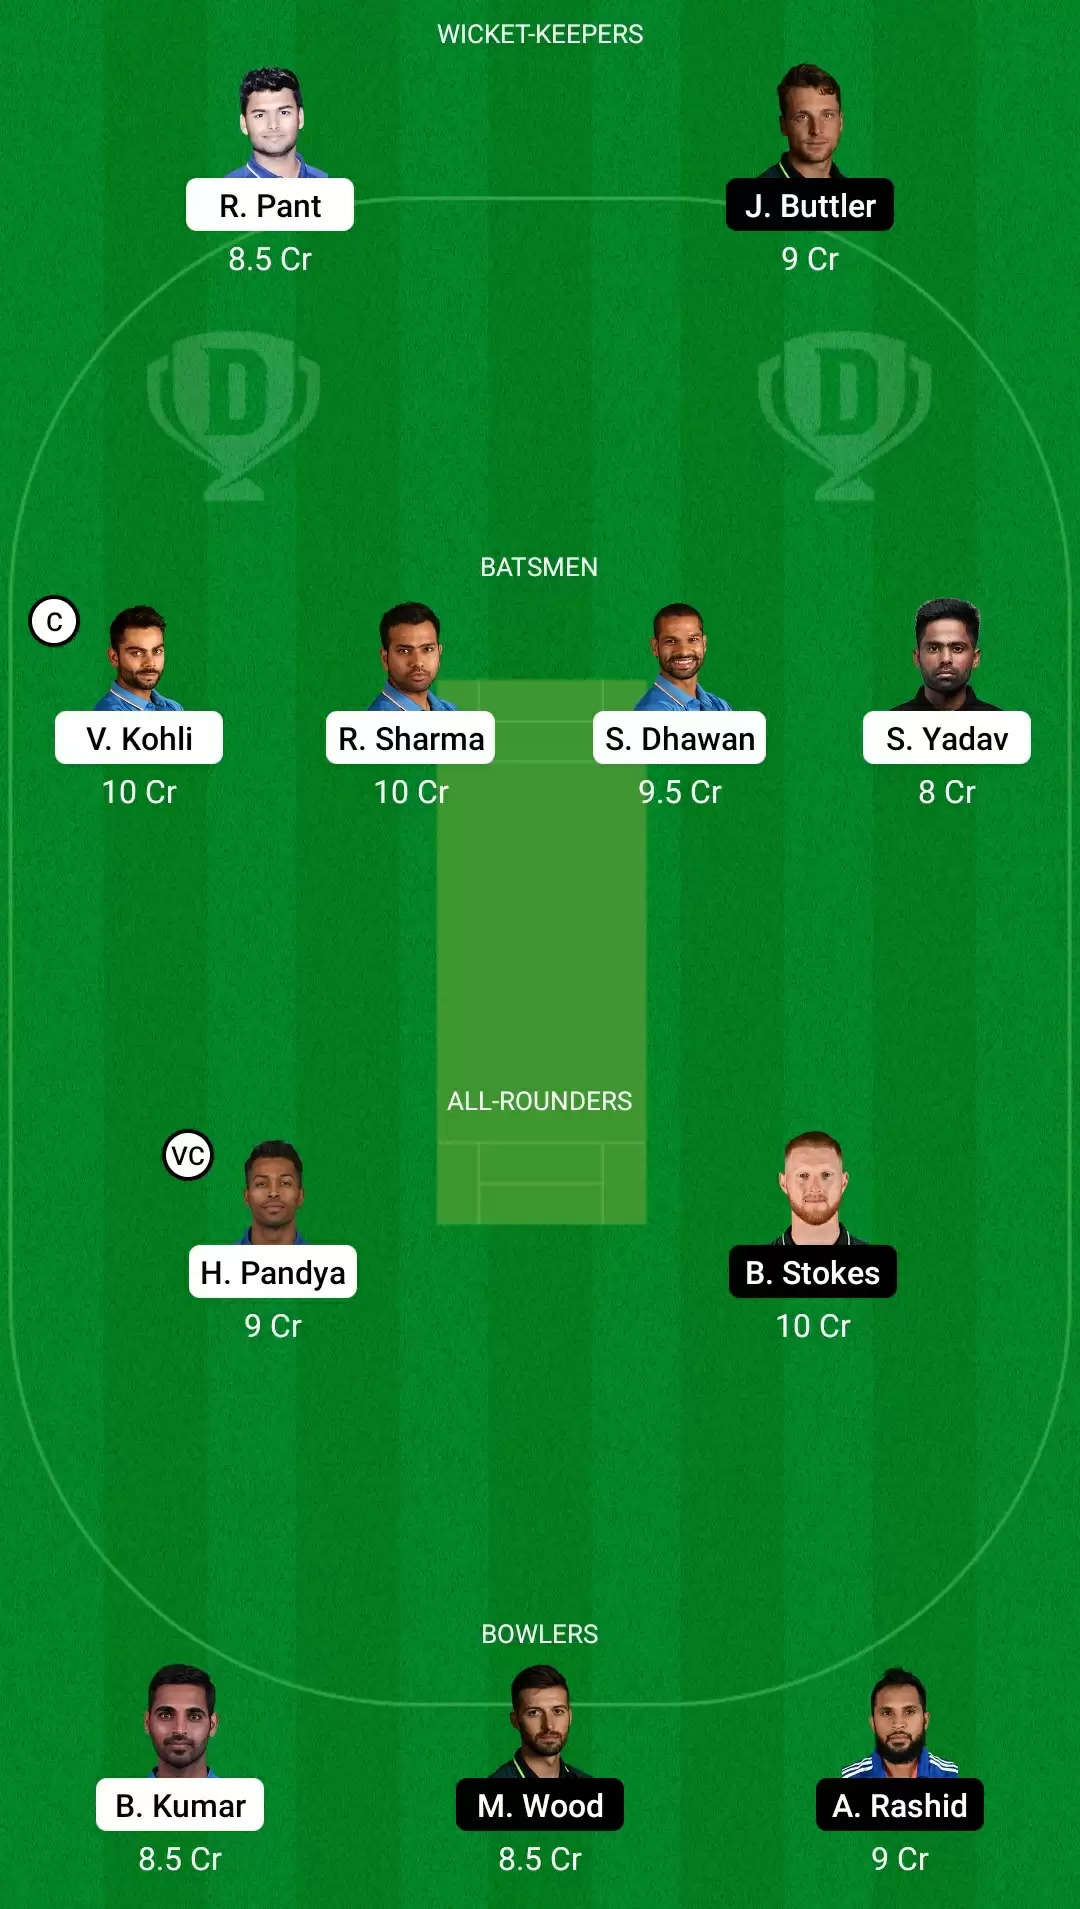 IND vs ENG Dream11 Team Prediction for 1st ODI : Best Fantasy Cricket Tips, Playing XI, Team & Top Player Picks